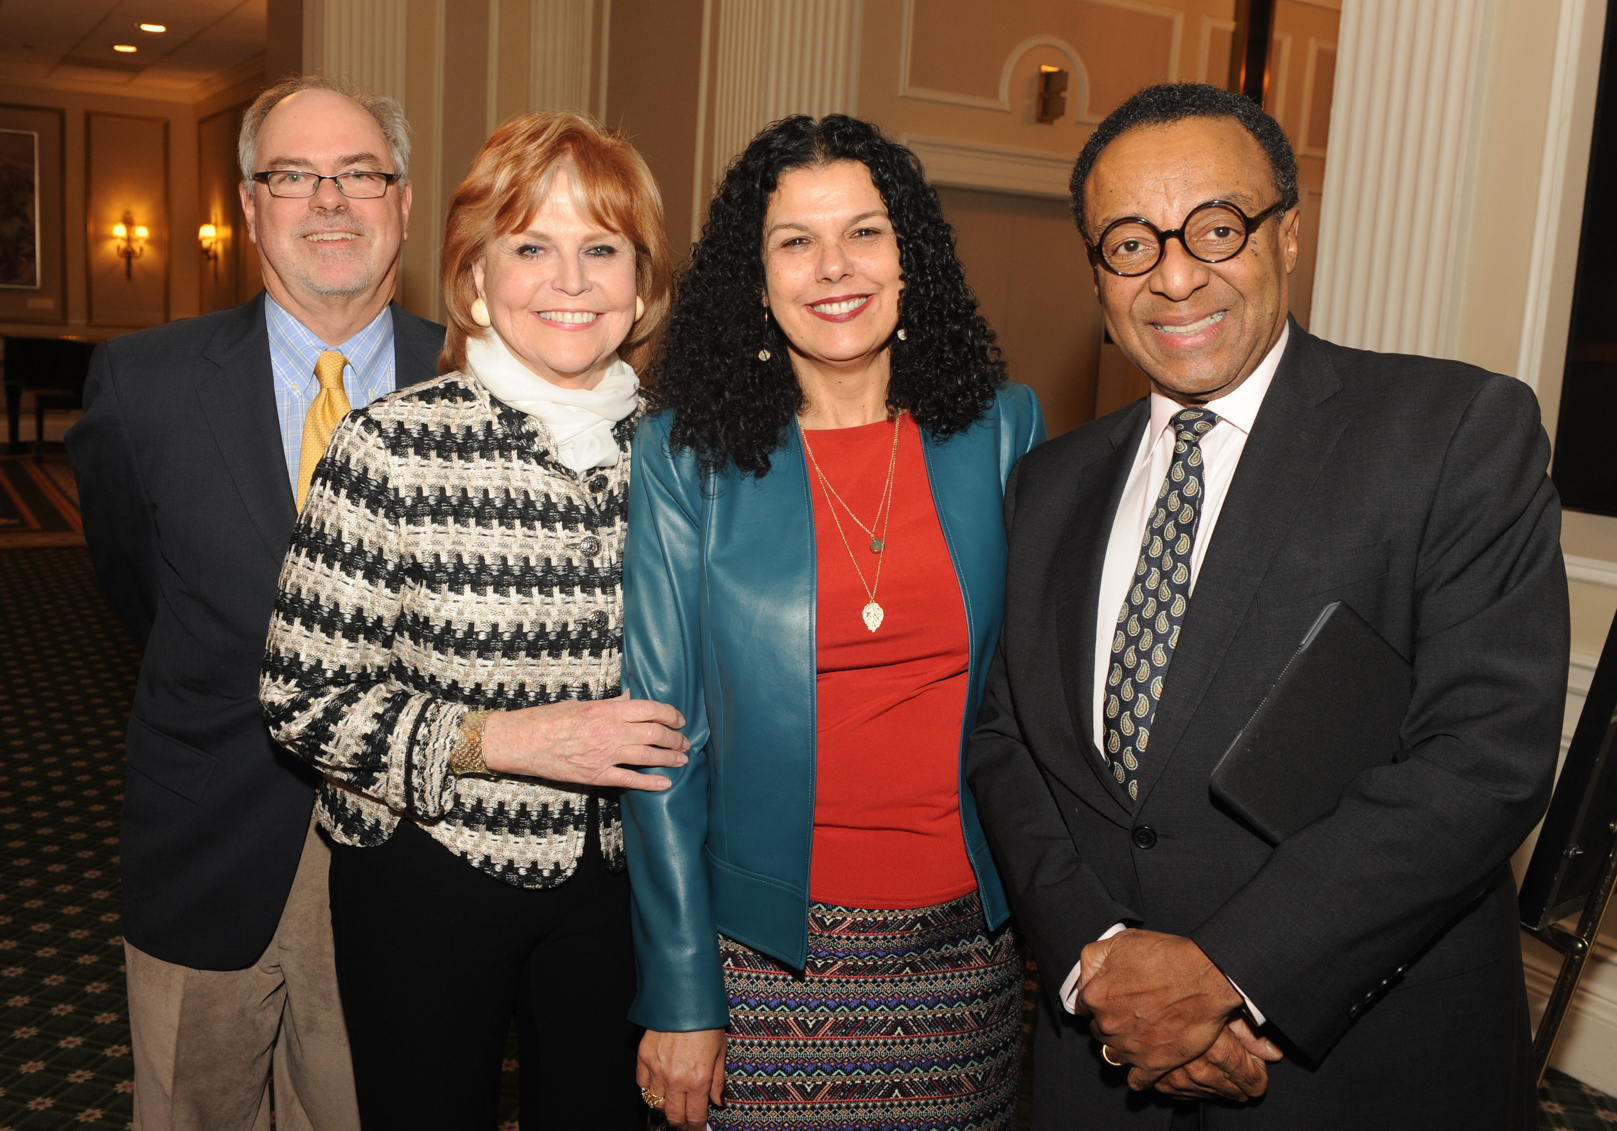 (from L to R) Center for Journalism Co-Directors Don Moseley and Carol Marin, College of Communication Dean Salma Ghanem, and Clarence Page. (Photo by Paul Berg.)